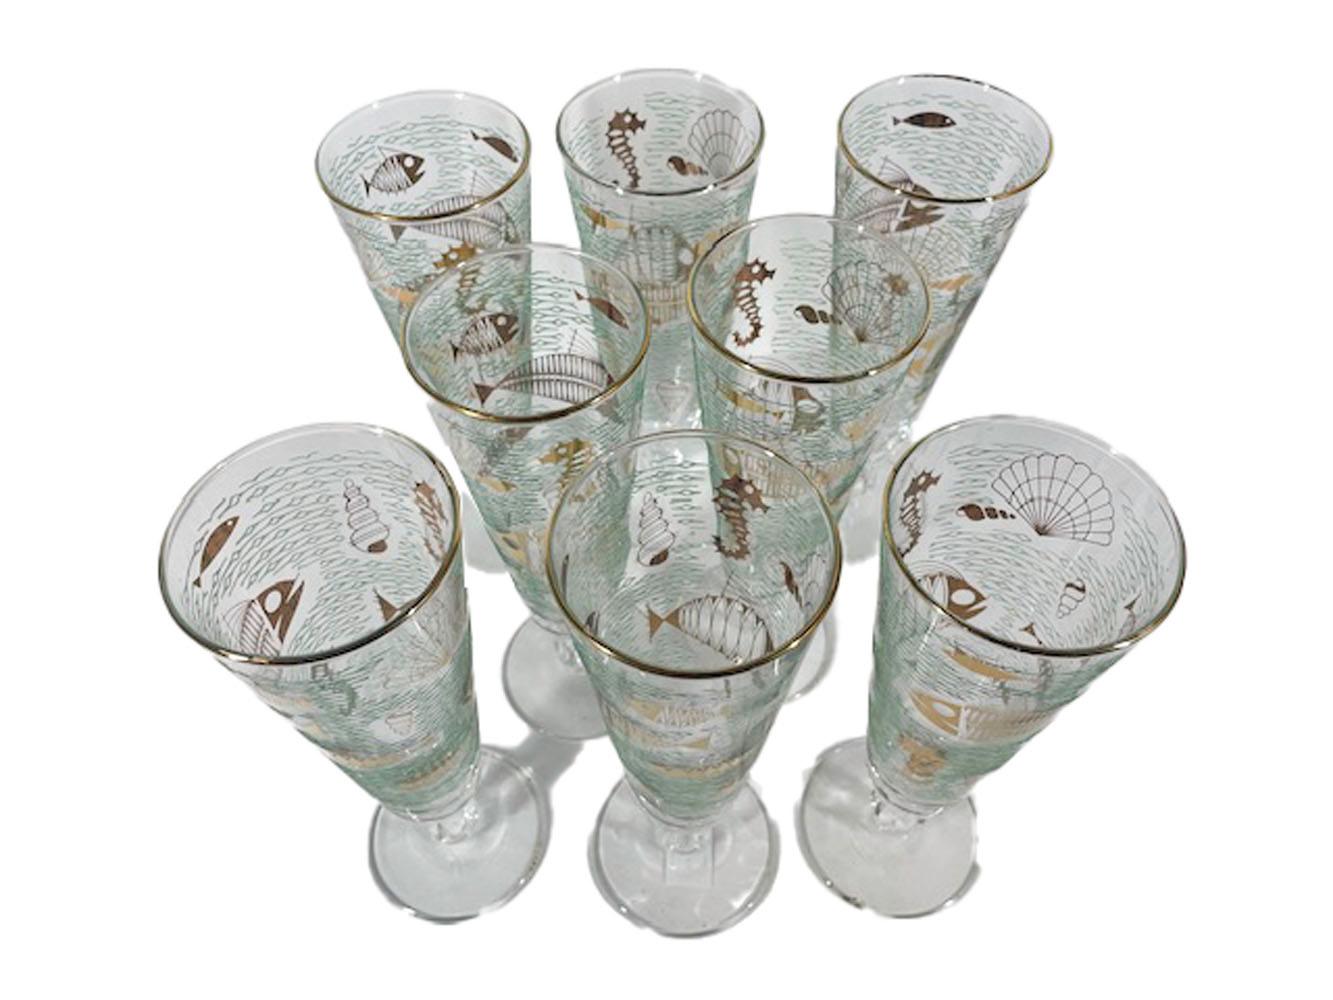 American Set of 8 Vintage Marine Life Pilsner Glasses by Libbey Glass Co